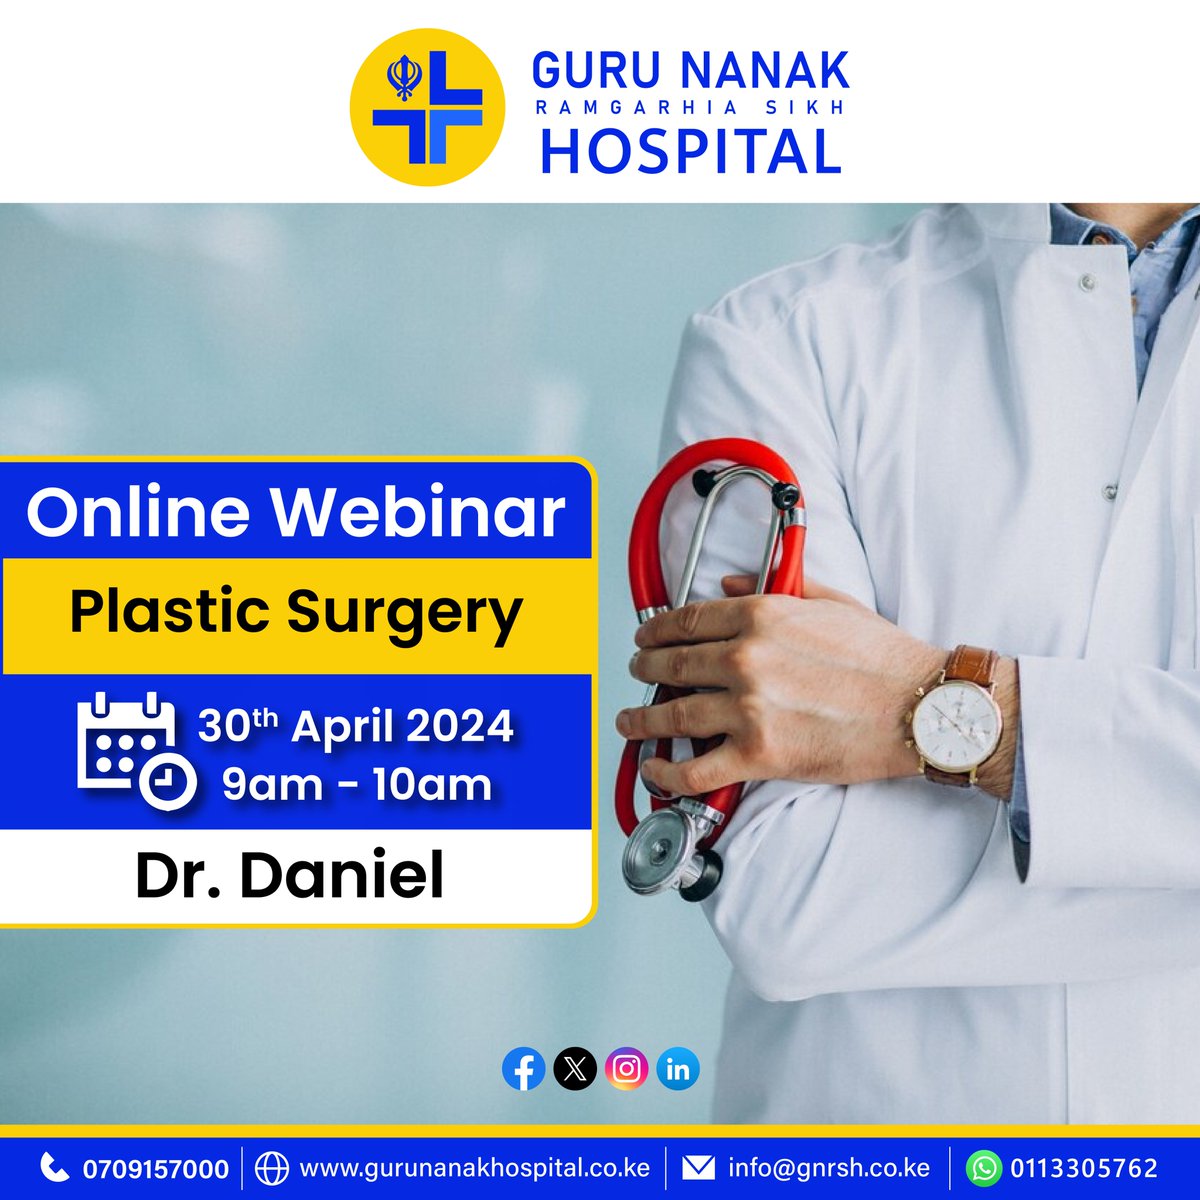 Be part of an insightful online #Webinar on 30th April 2024, delving into the world of #PlasticSurgery! Learn about the latest techniques, safety measures, and ethical considerations.   #MedicalAdvancements #CosmeticEnhancements #StayInformed